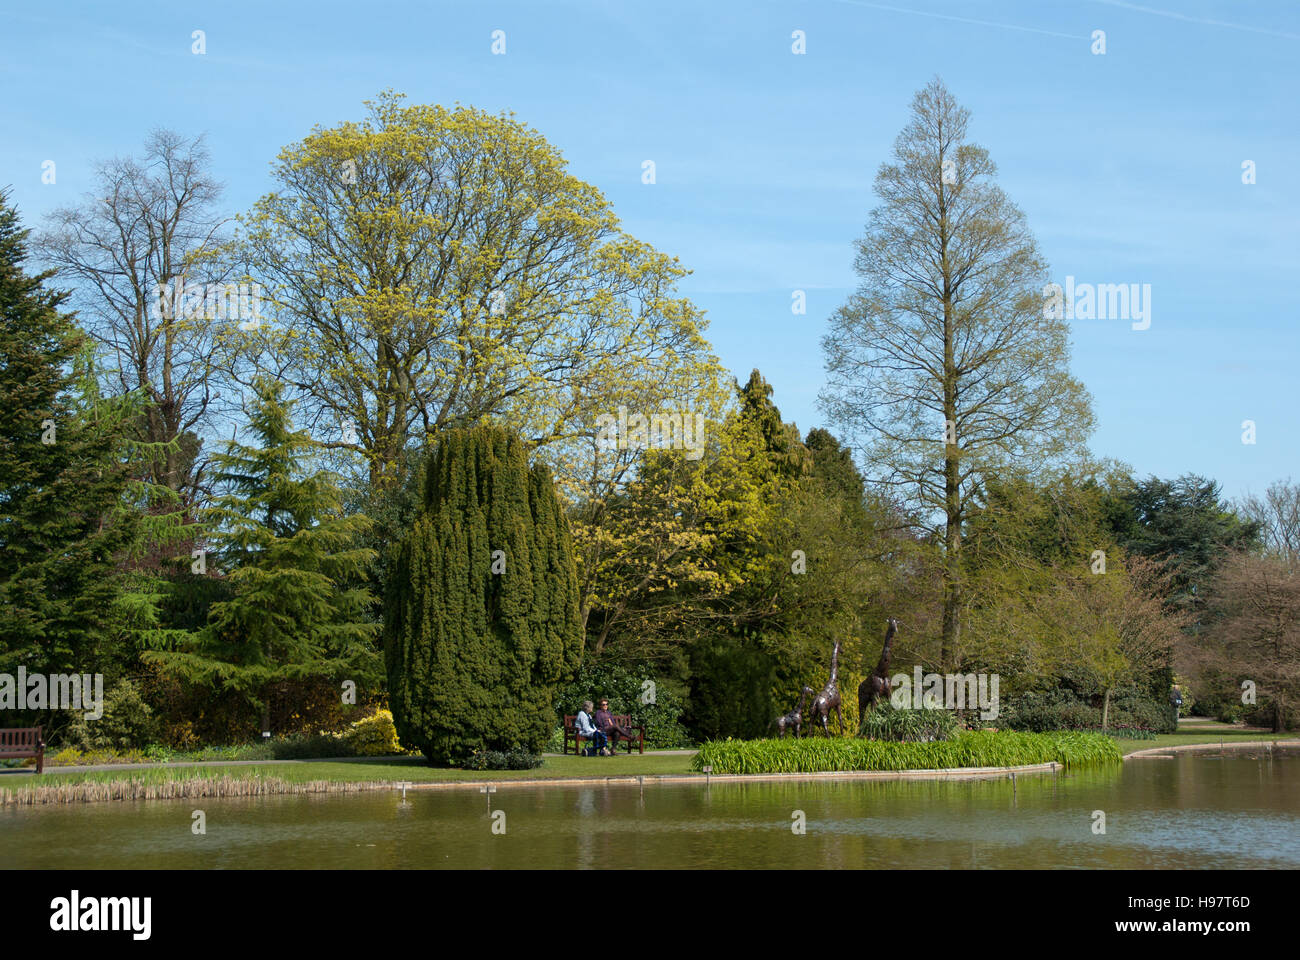 Burnby Hall Gardens Banque D'Images